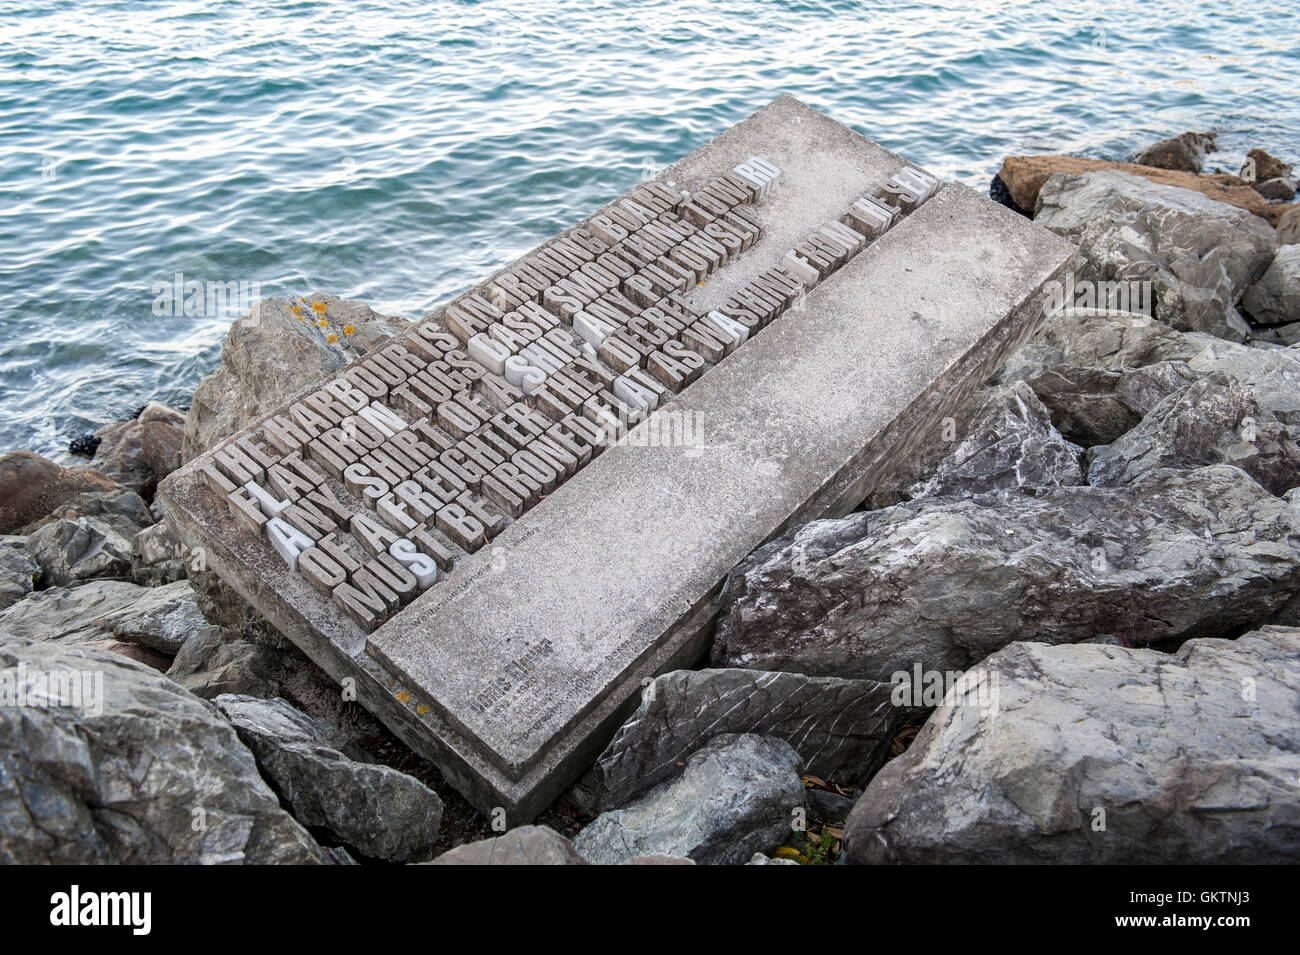 Wellington, New Zealand - March 3, 2016: Text sculpture along Wellington waterfront, north island of New Zealand Stock Photo